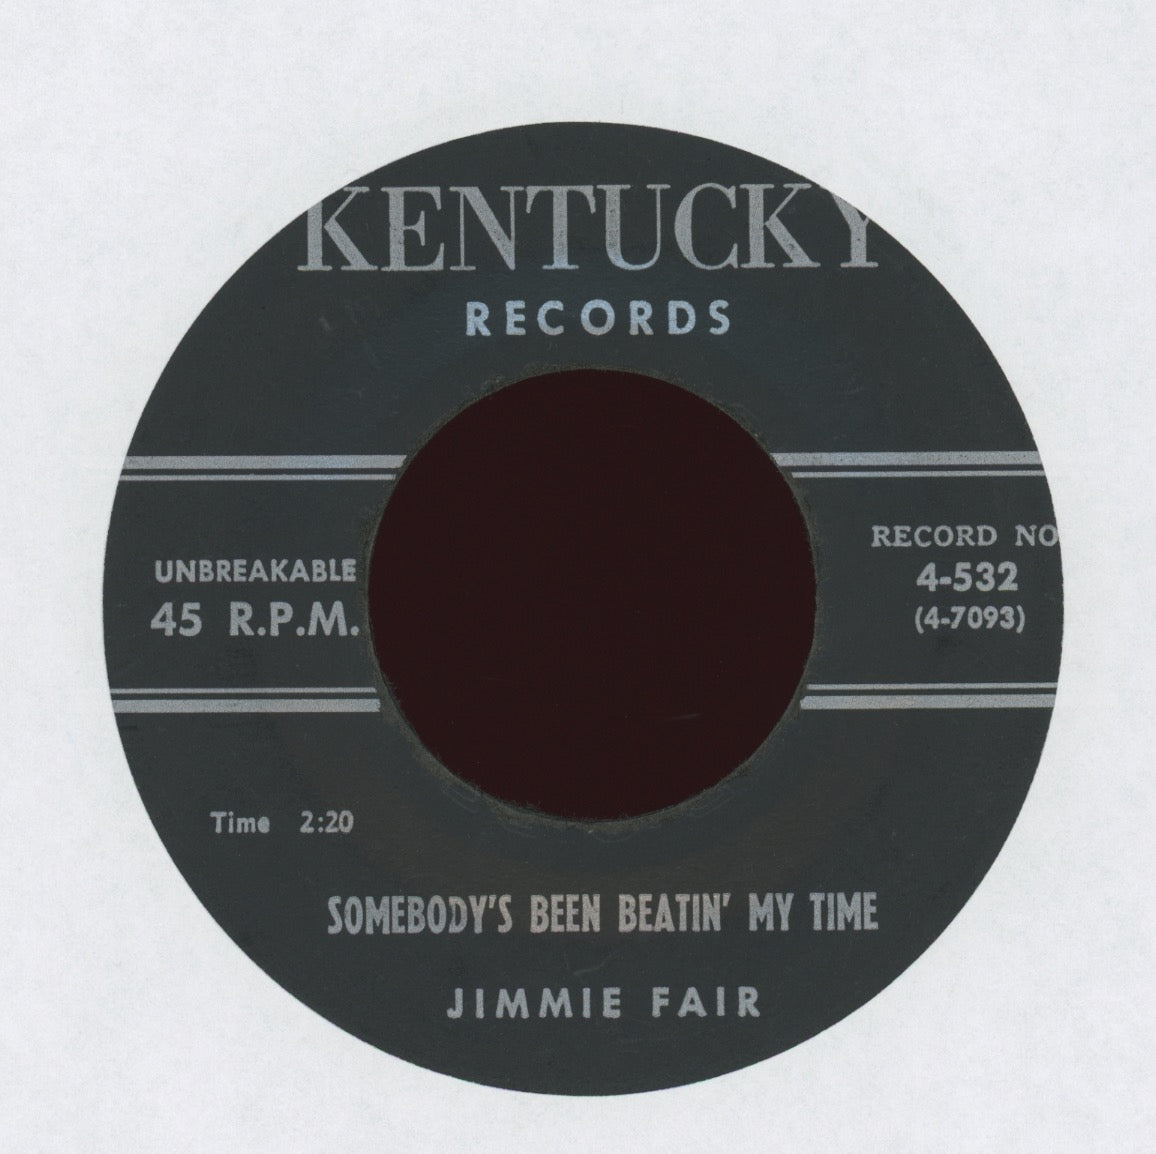 Jimmie Fair - Somebody's Been Beatin' My Time on Kentucky